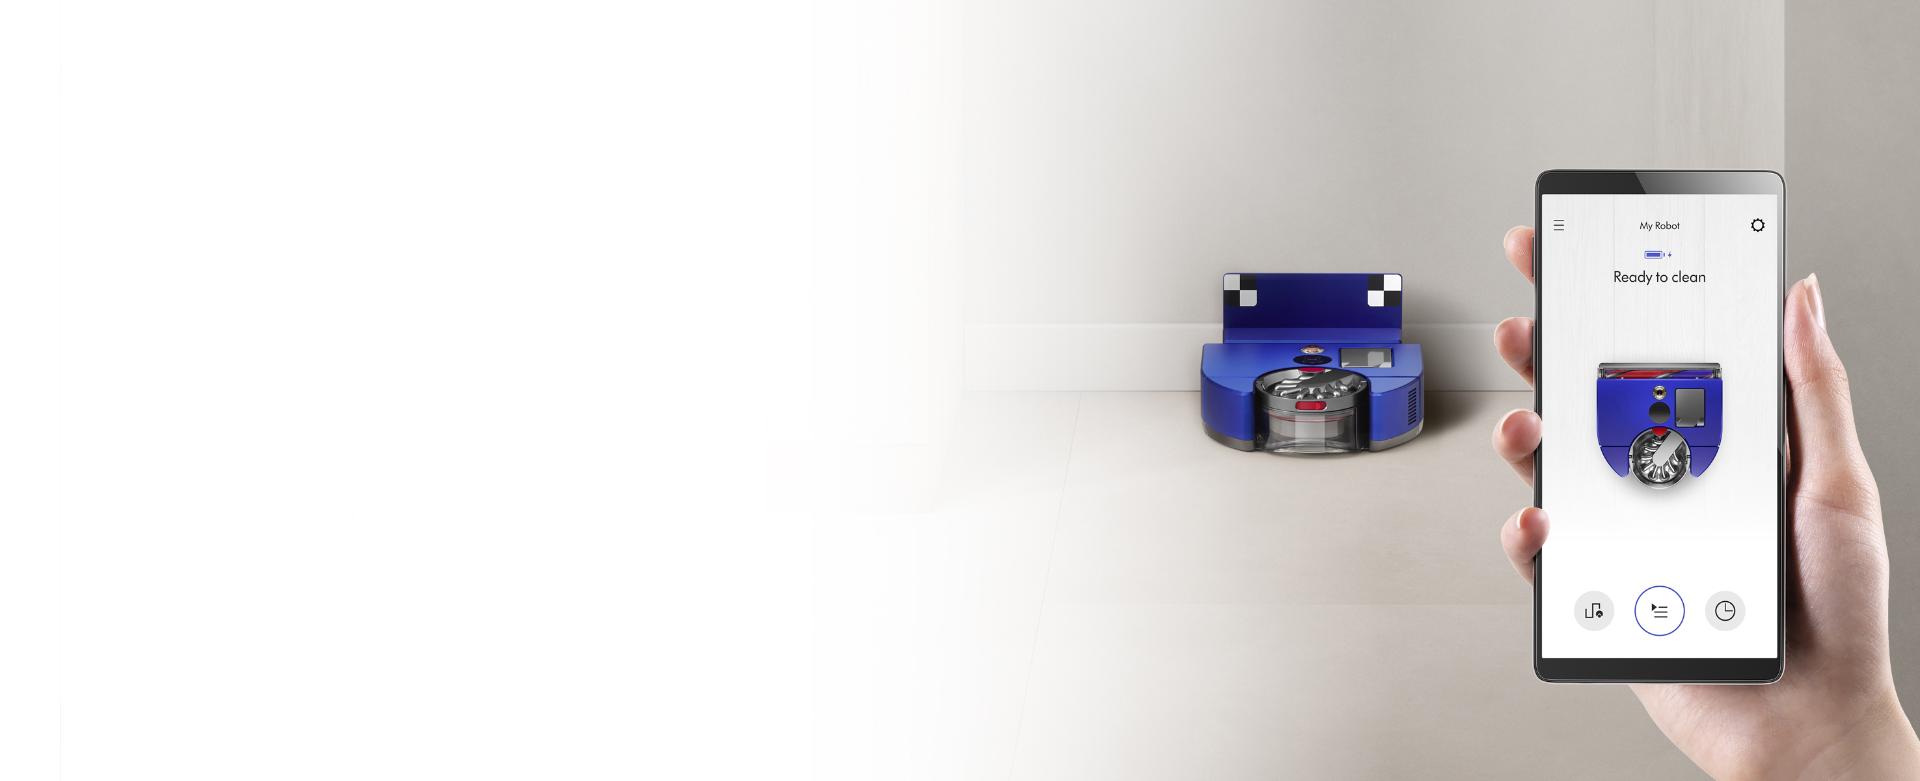 Dyson 360 Vis Nav robot vacuum being controlled with the app